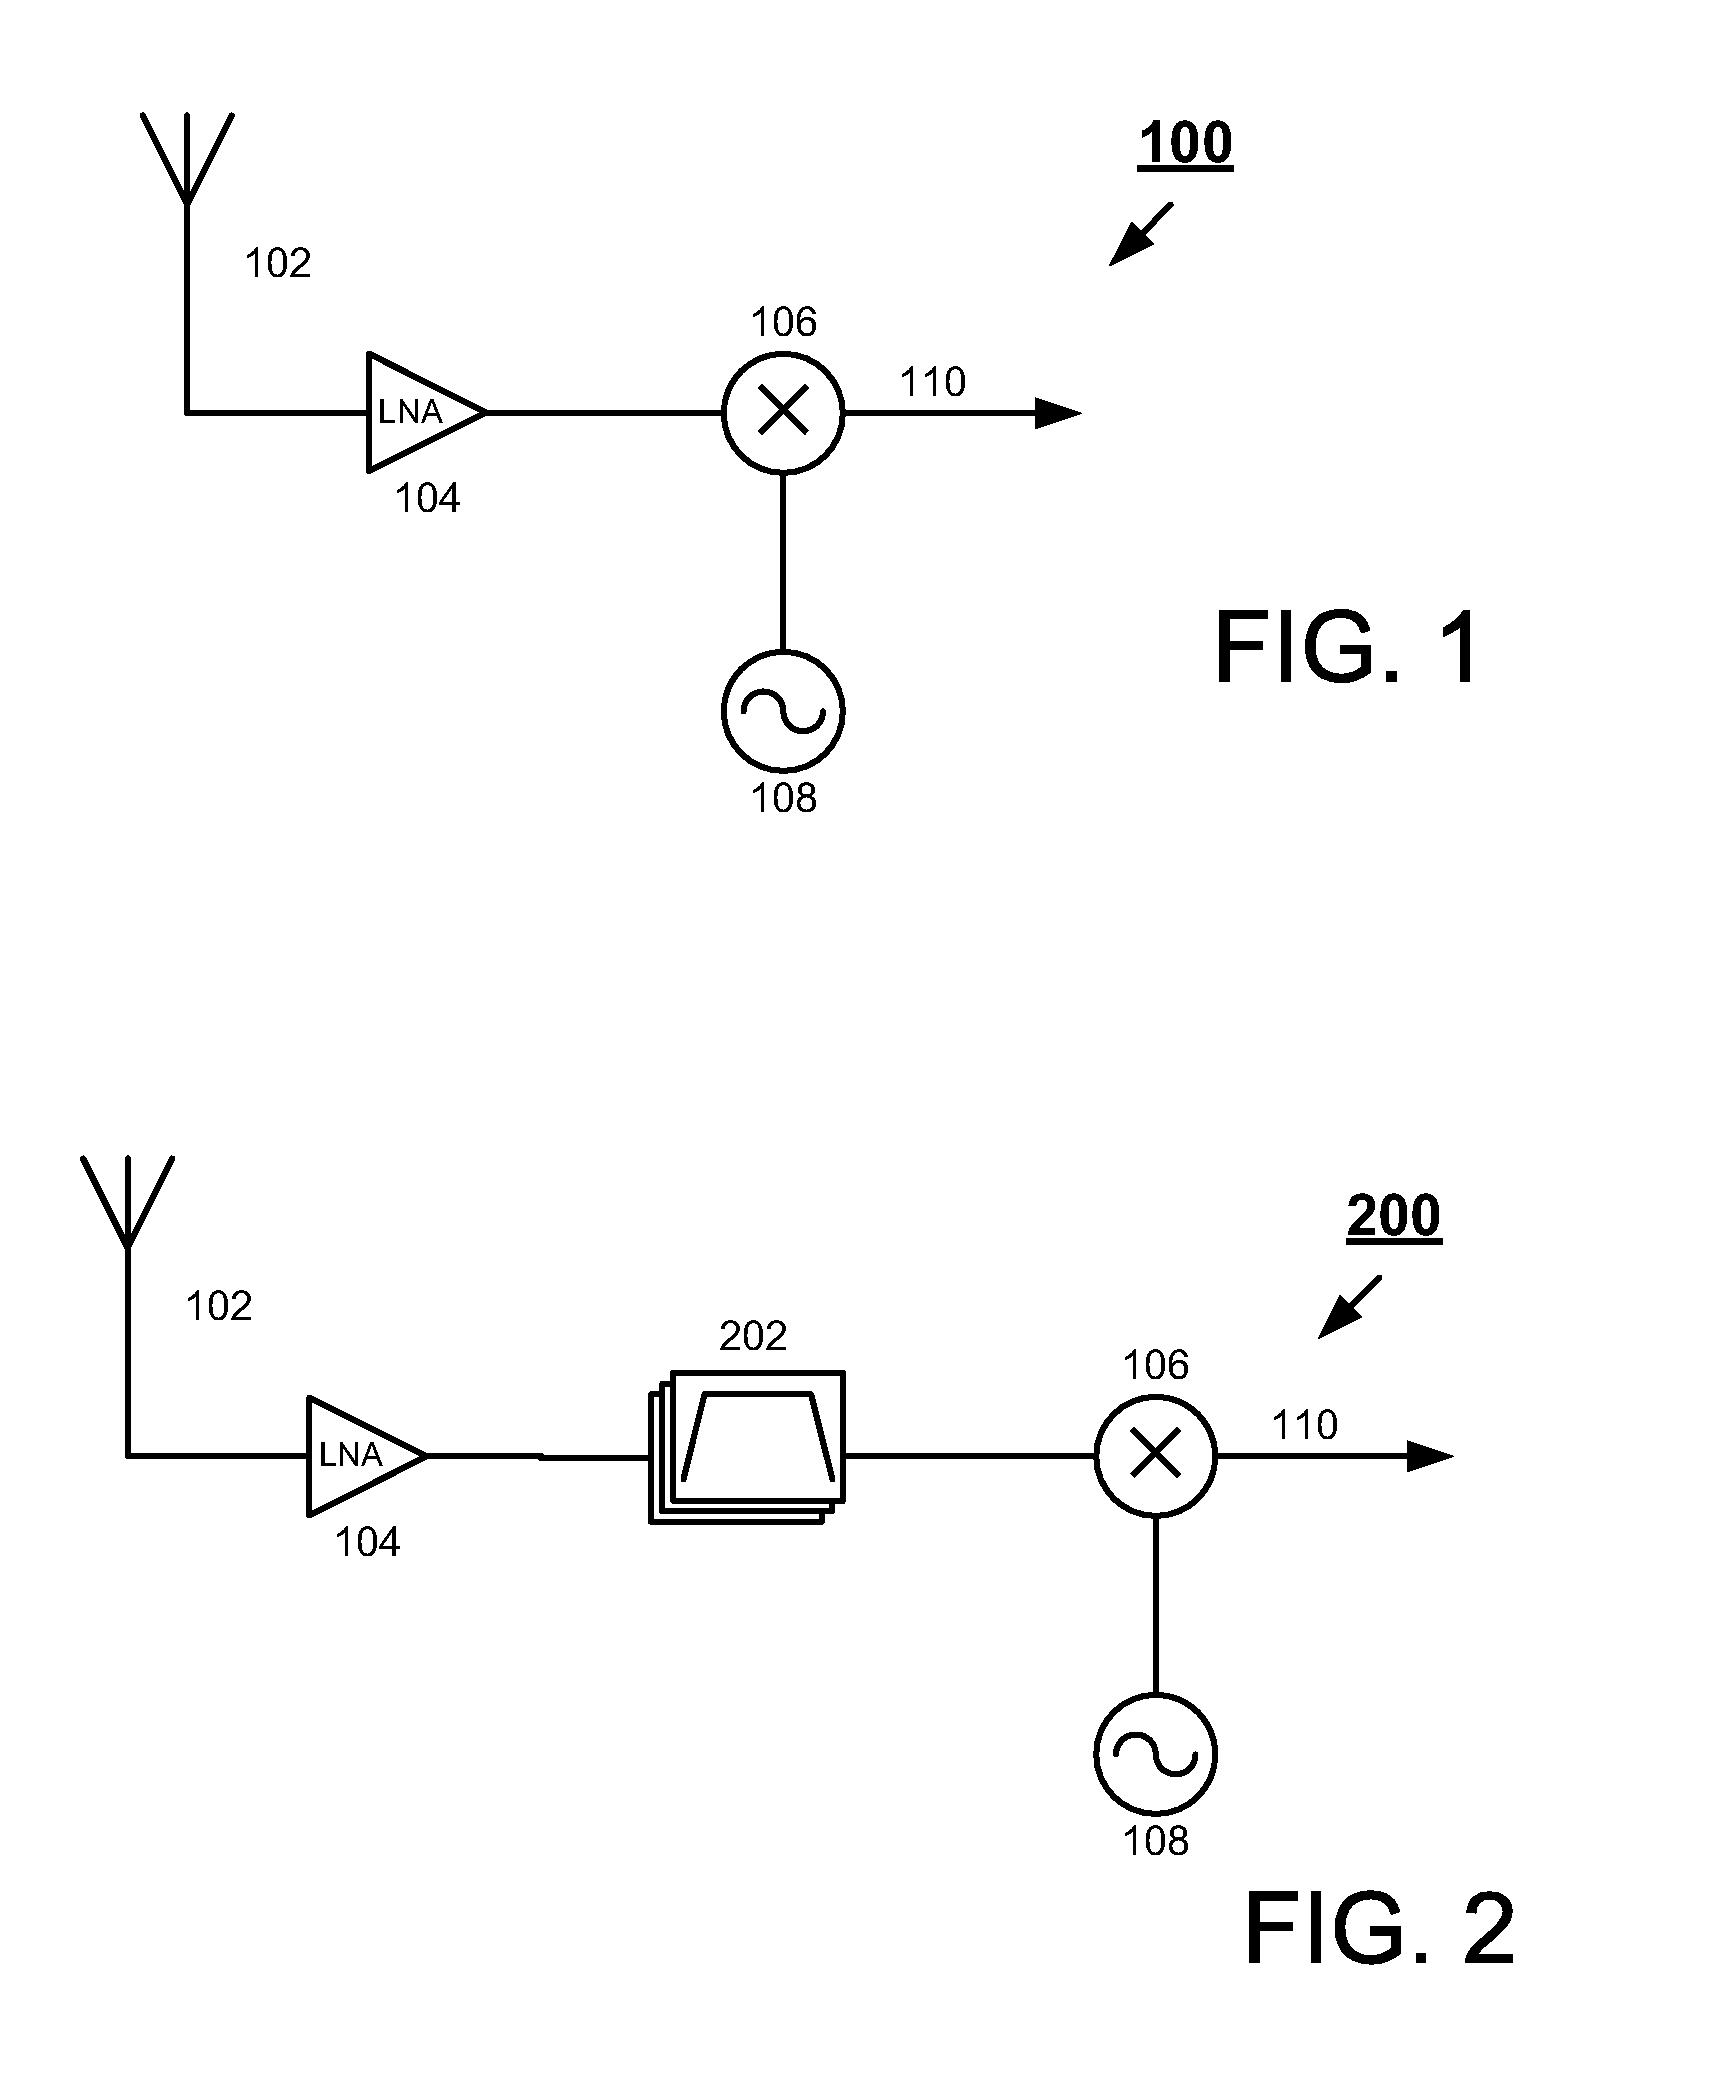 Integrated Wideband RF Tracking Filter for RF Front End with Parallel Band Switched Tuned Amplifiers